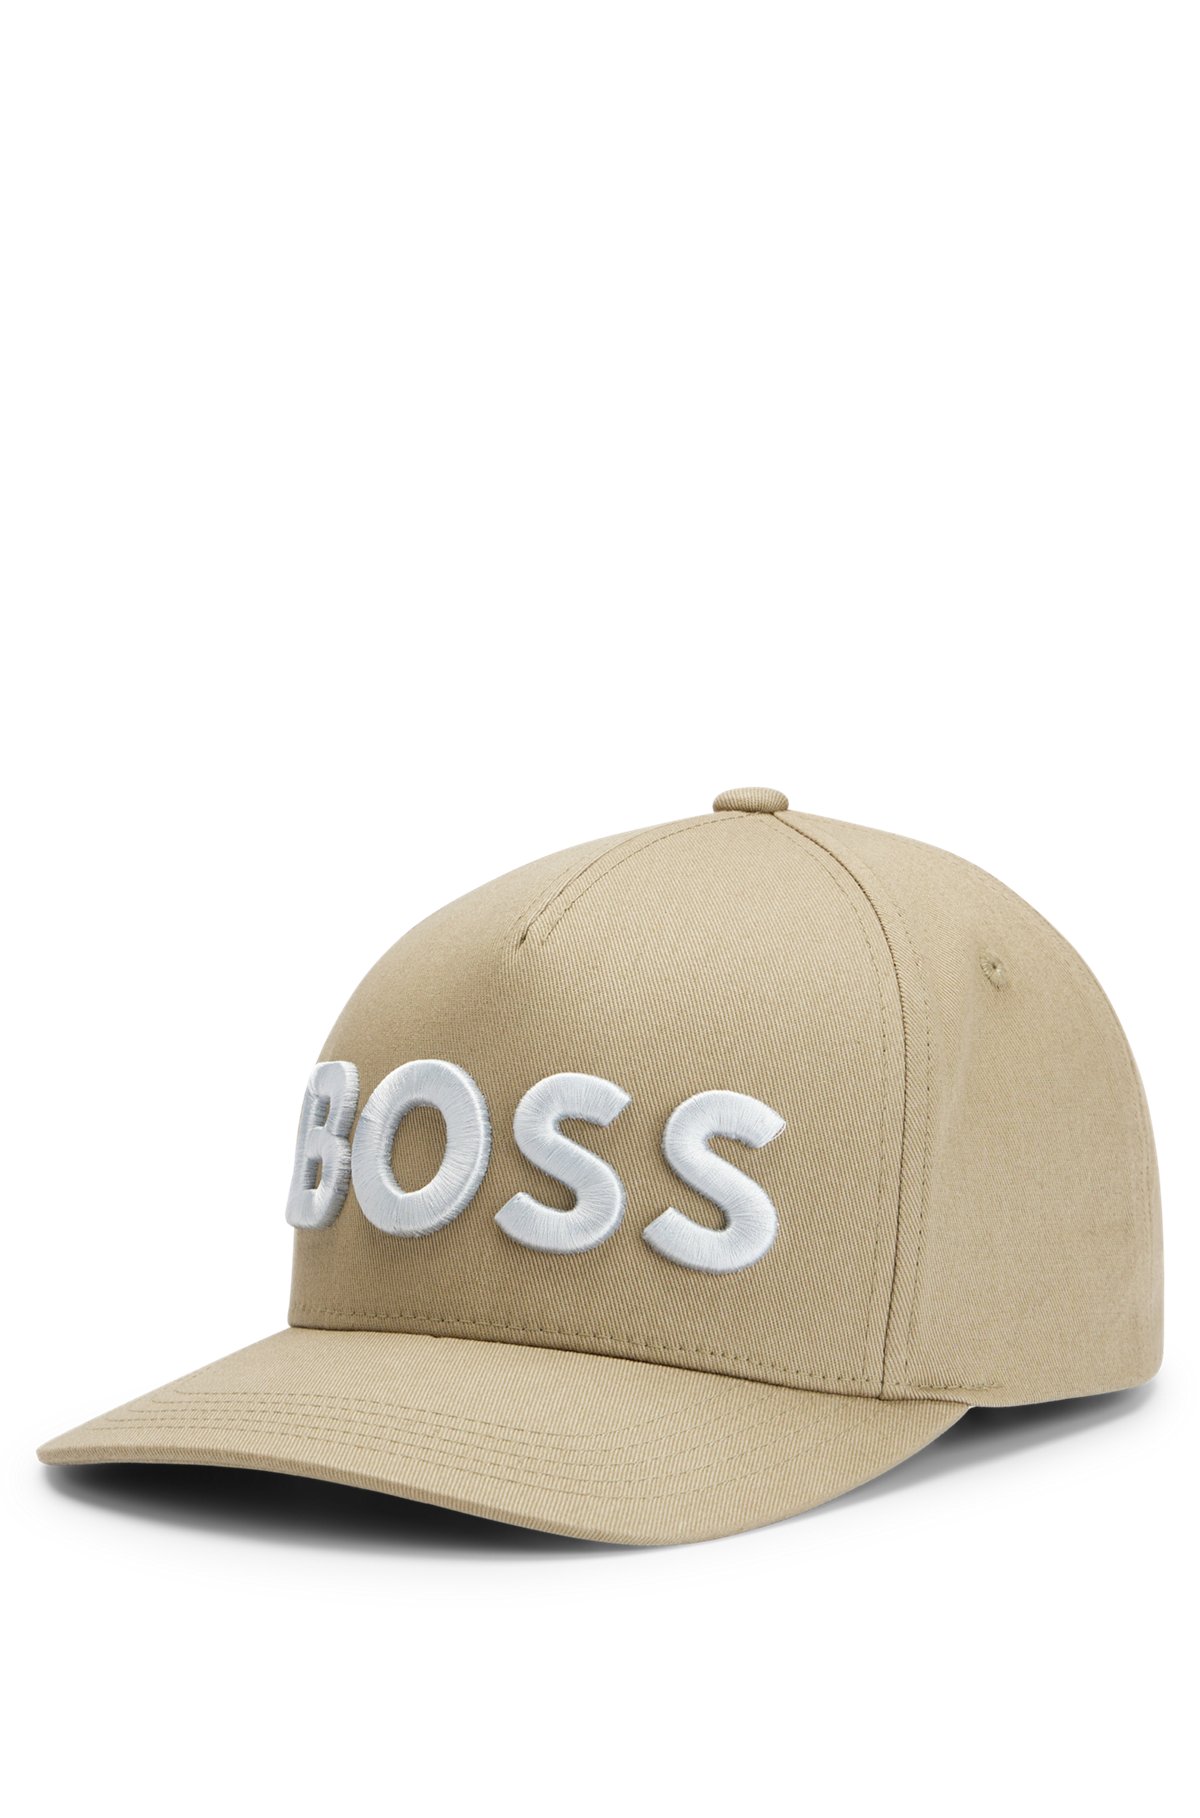 Cotton-twill cap with - embroidered strap logo adjustable BOSS and